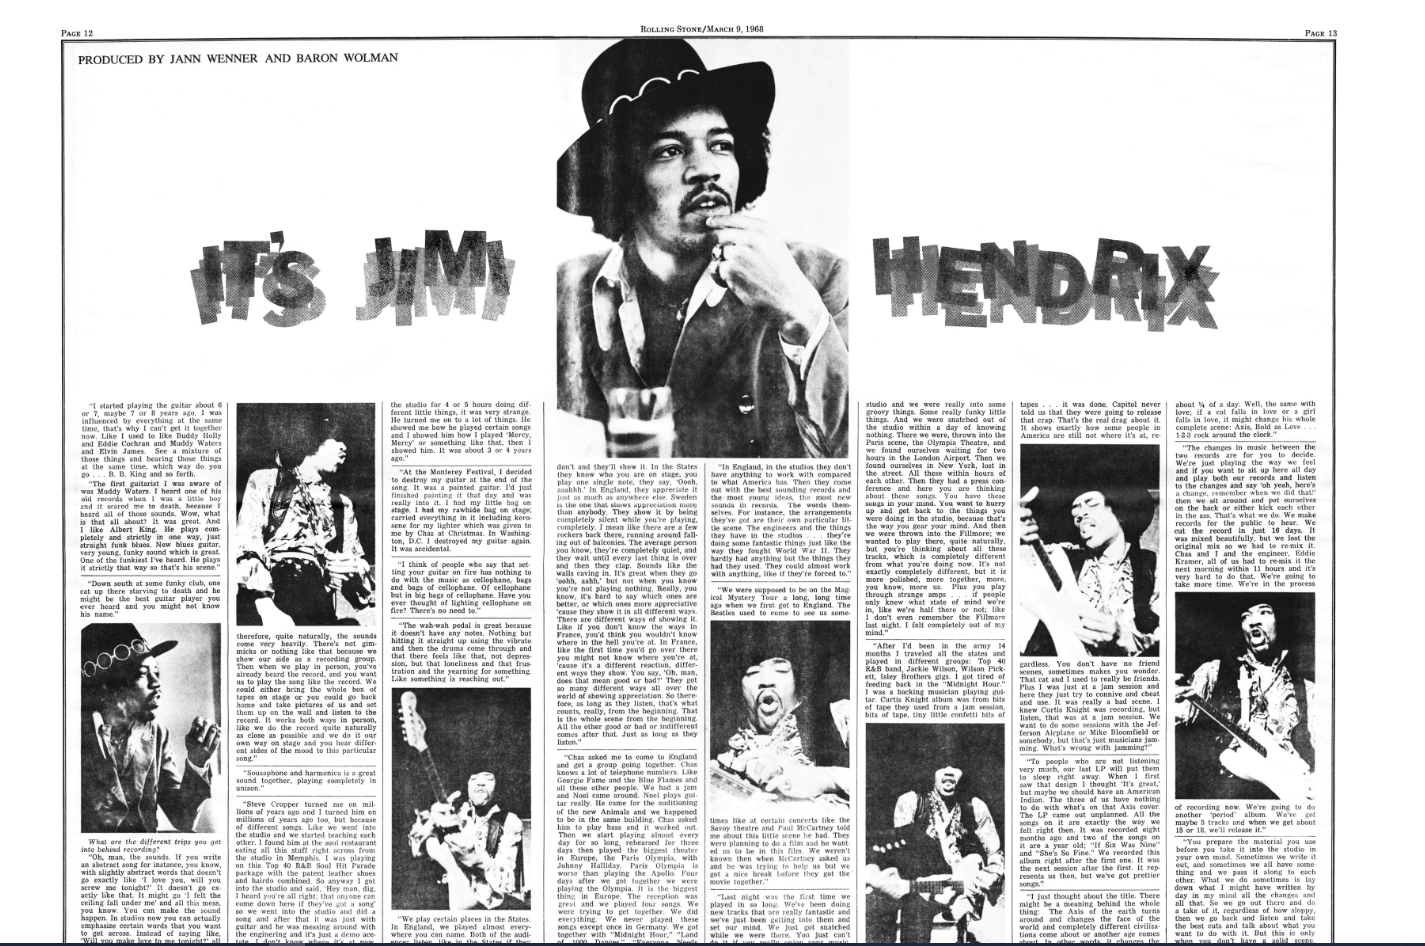 JIMI HENDRIX: 1968|1970 BY BARON WOLMAN - SILVER GILDED DELUXE EDITION BOOK